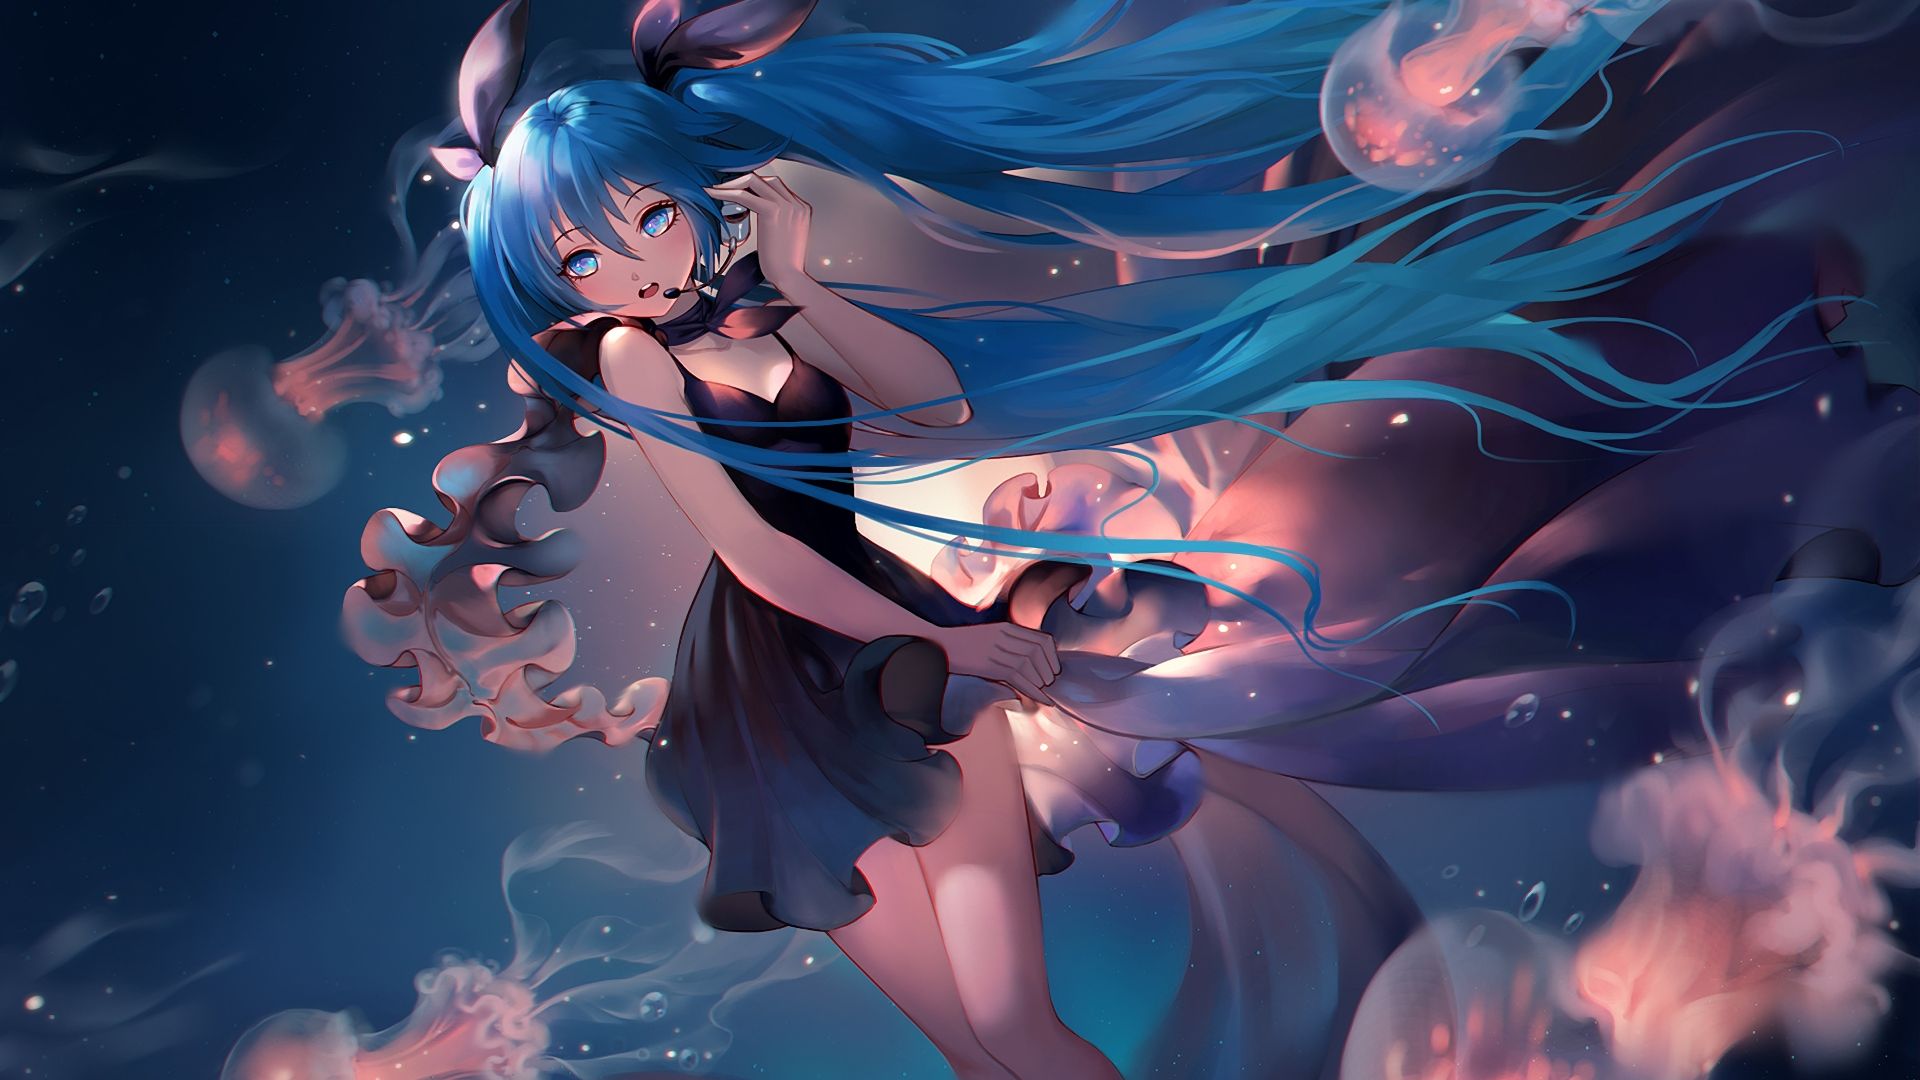 Anime Girl with Blue Hair - wide 1